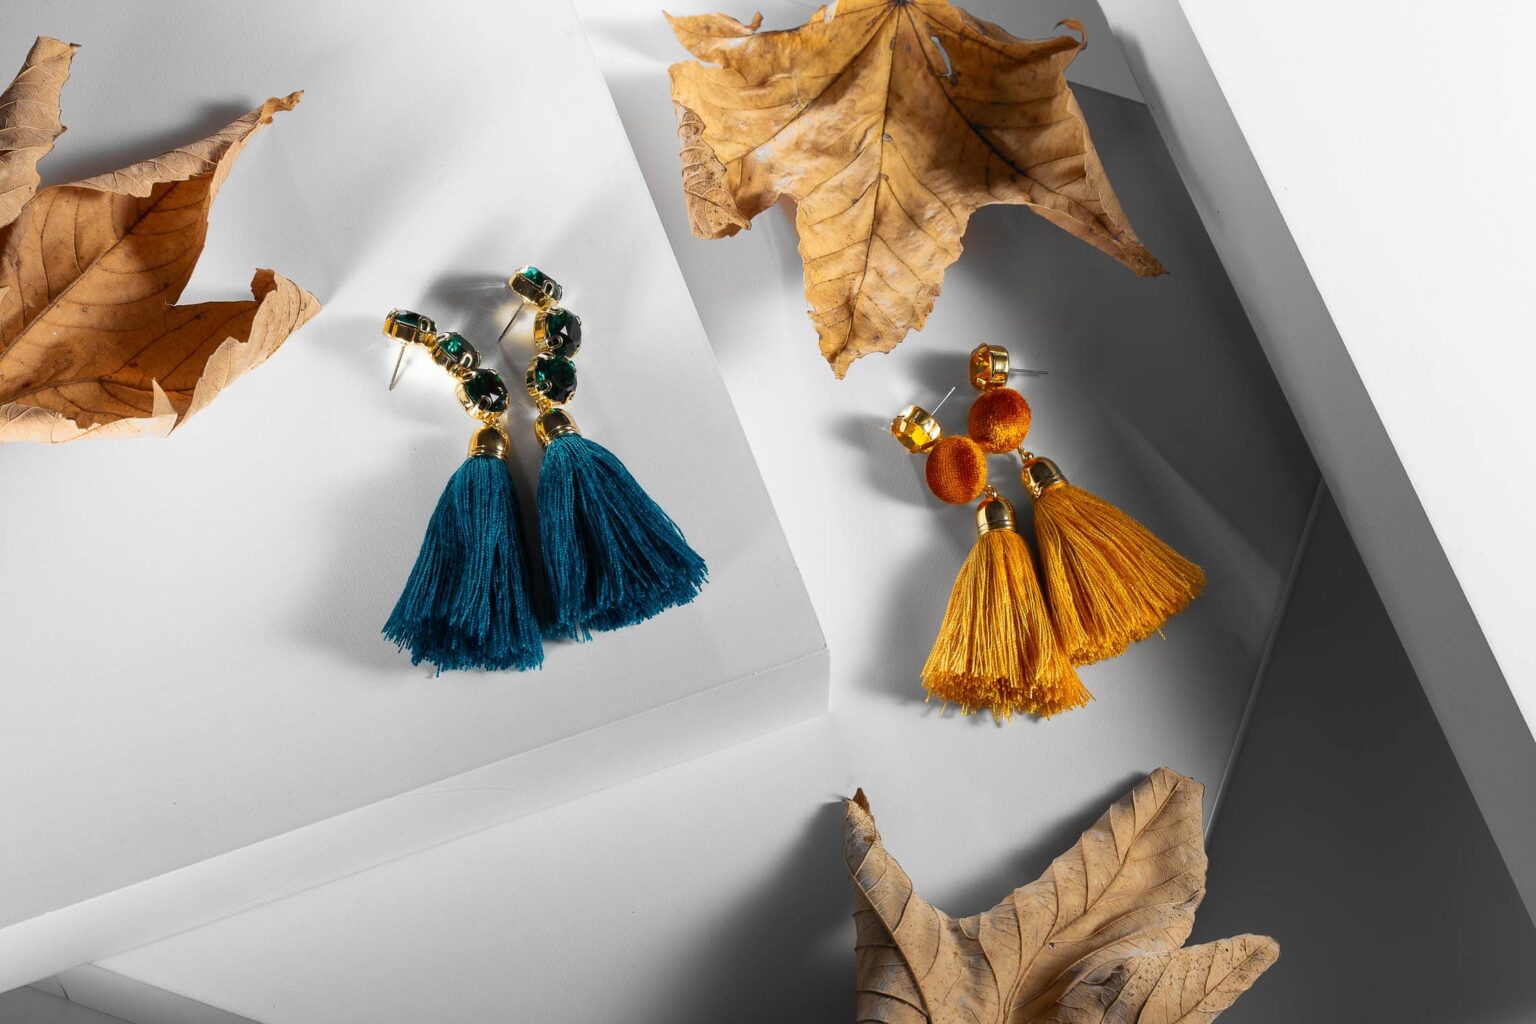 Photographing jewelry in color of autumn